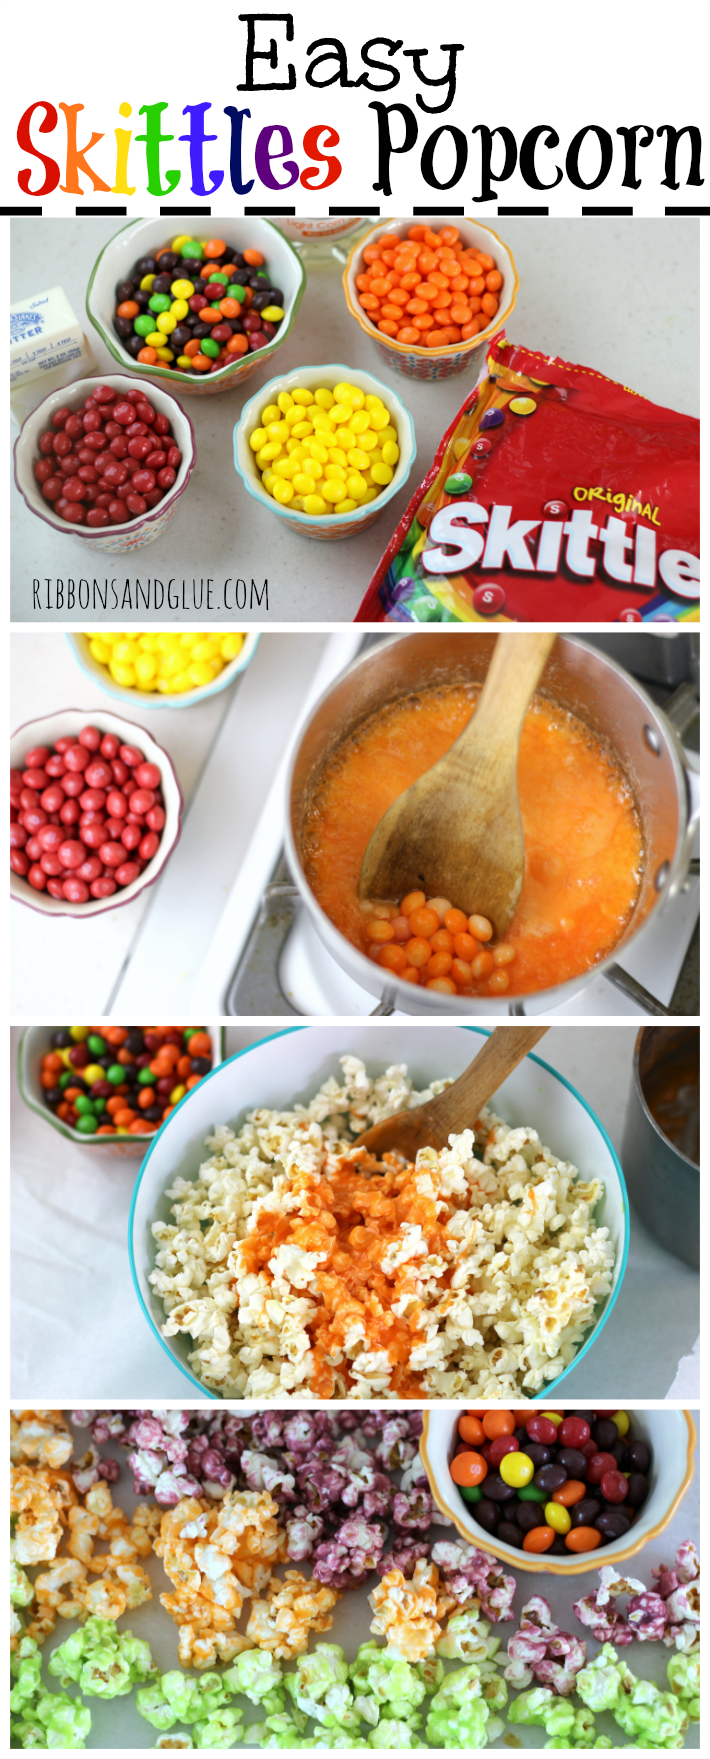 How to make Skittles Popcorn. Skittles candy melted on popcorn taste just like the flavor color! So easy to make and super yummy! 